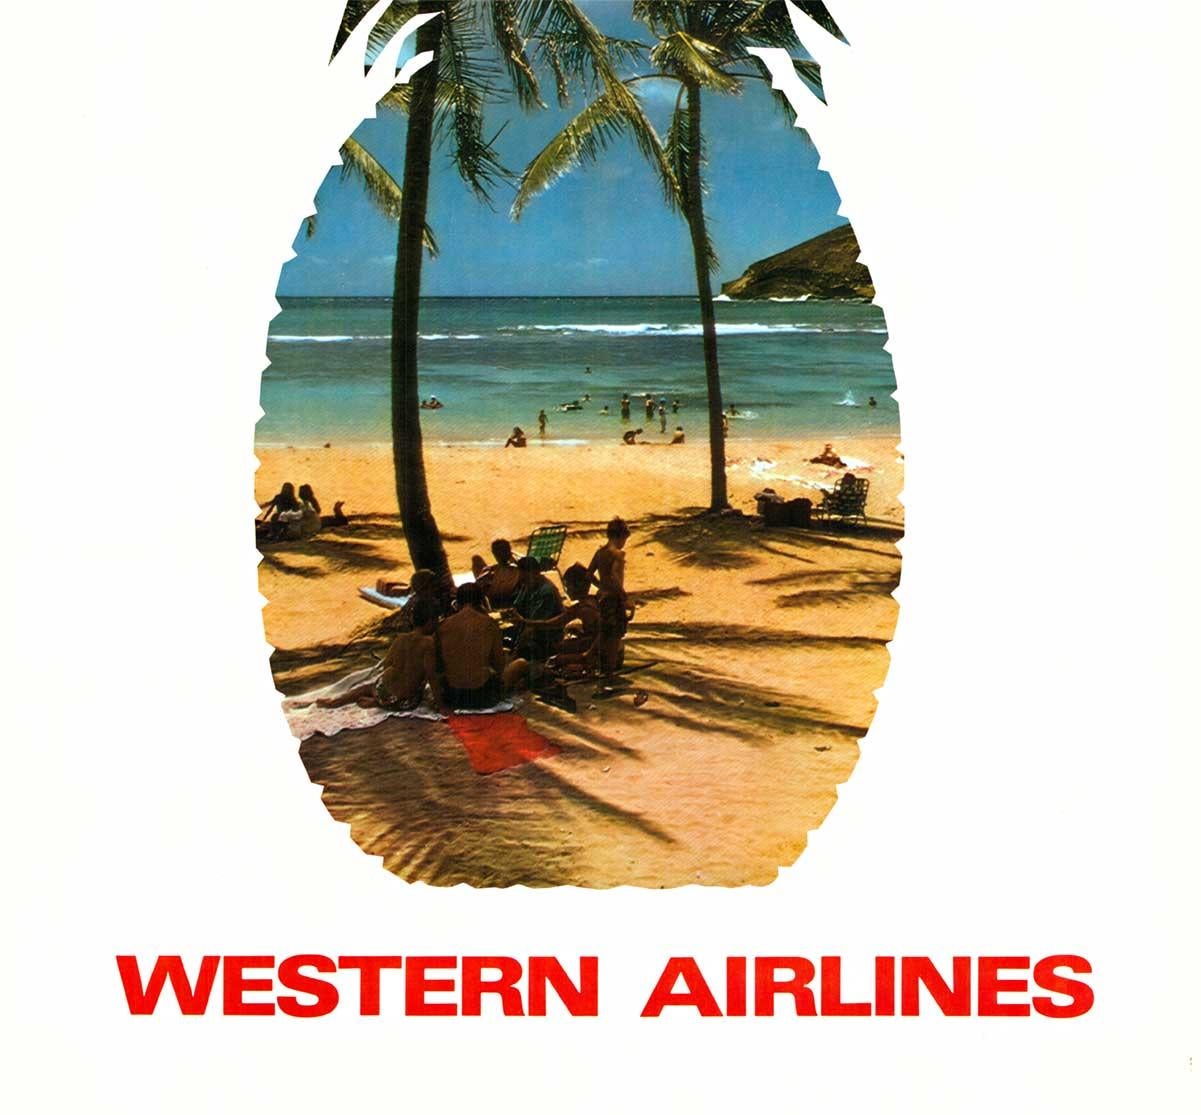 The original Hawaii Western Airlines 1970s vintage travel poster is archivally linen-backed, in excellent condition, and ready to frame. It was printed with a semi-glossy finish and has great vibrant colors. It's a fun image for anyone who loves